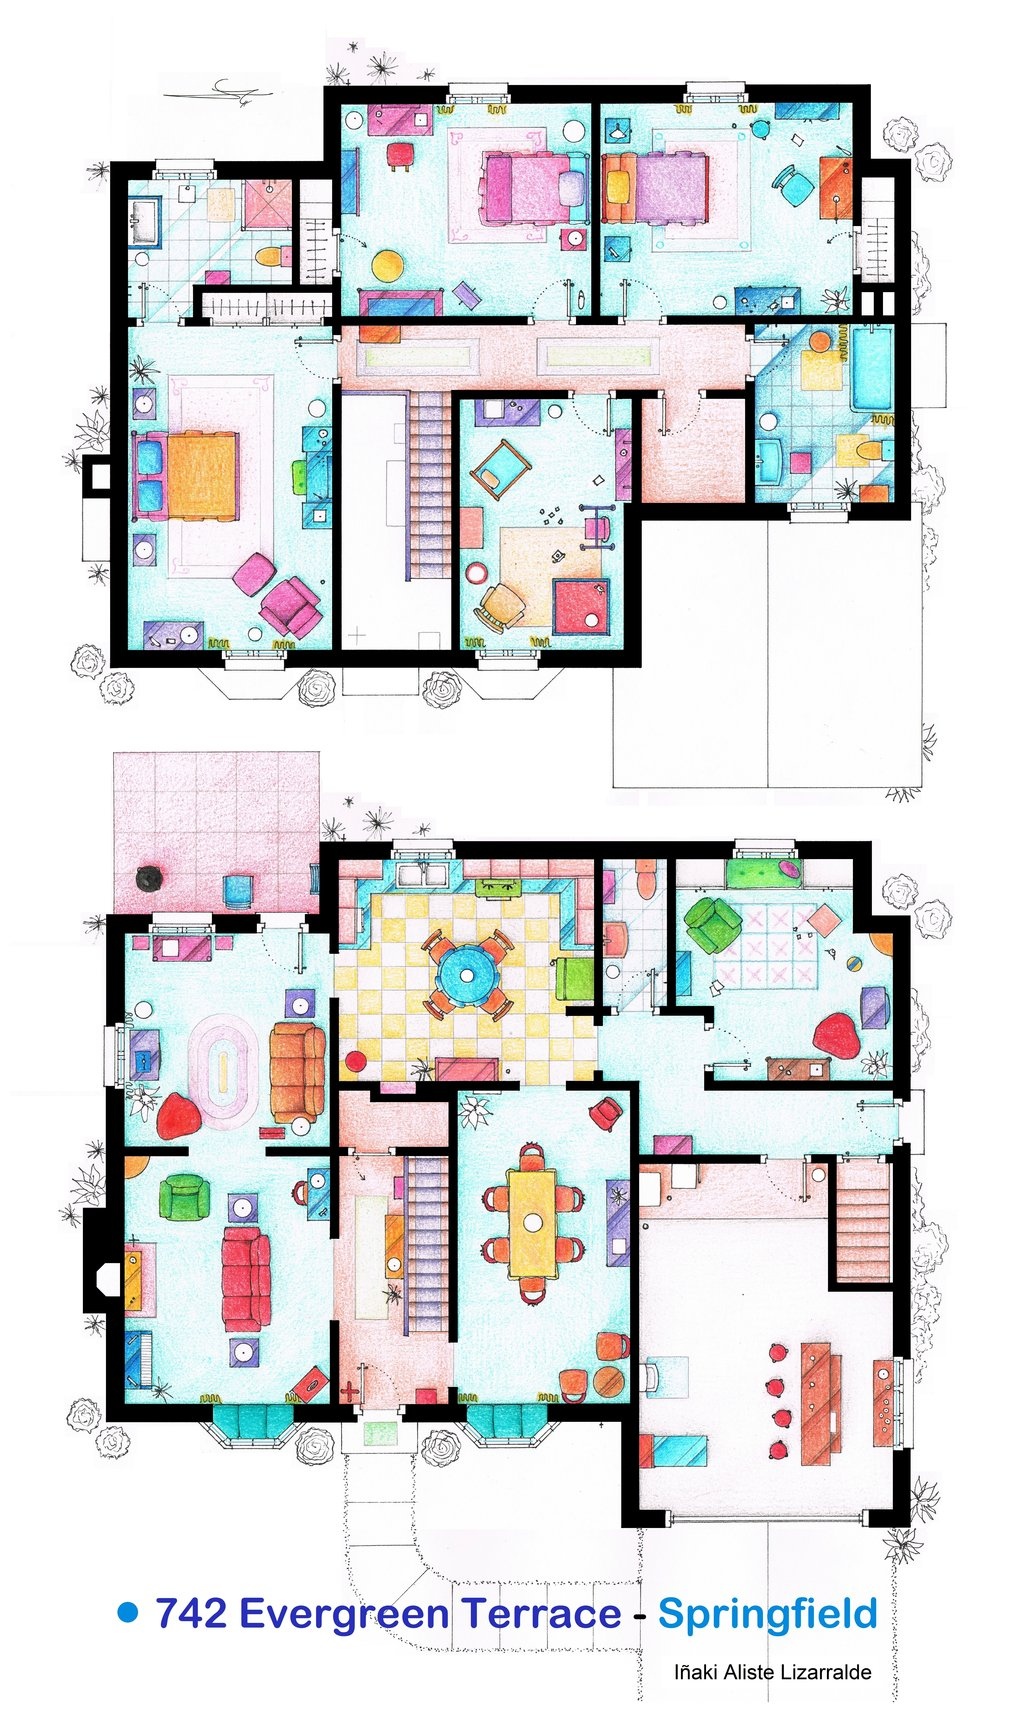 Floor plans of homes from famous TV shows